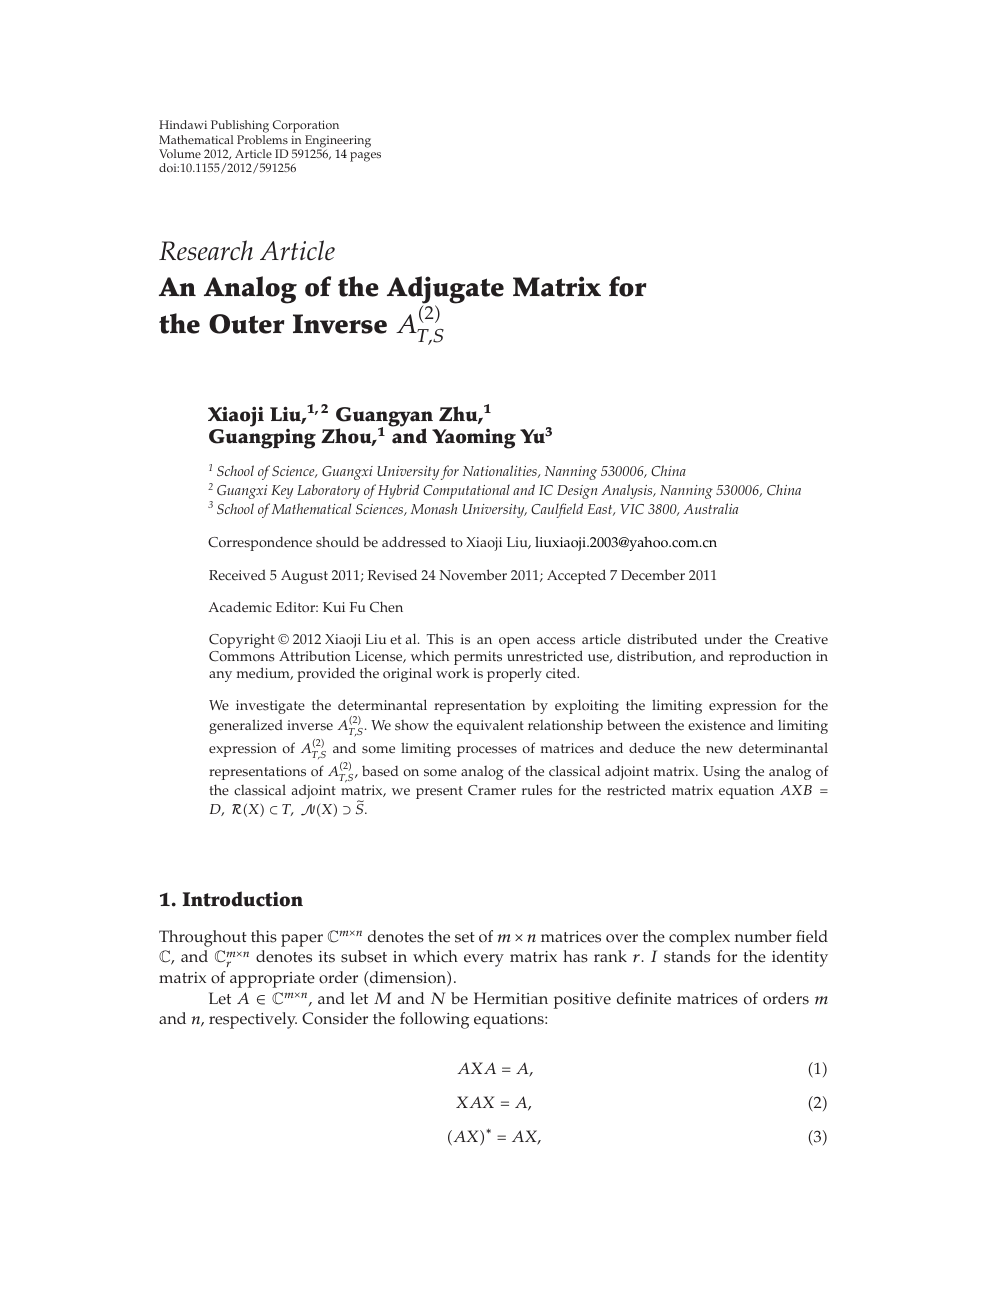 An Analog Of The Adjugate Matrix For The Outer Inverse A T S 2 Topic Of Research Paper In Mathematics Download Scholarly Article Pdf And Read For Free On Cyberleninka Open Science Hub